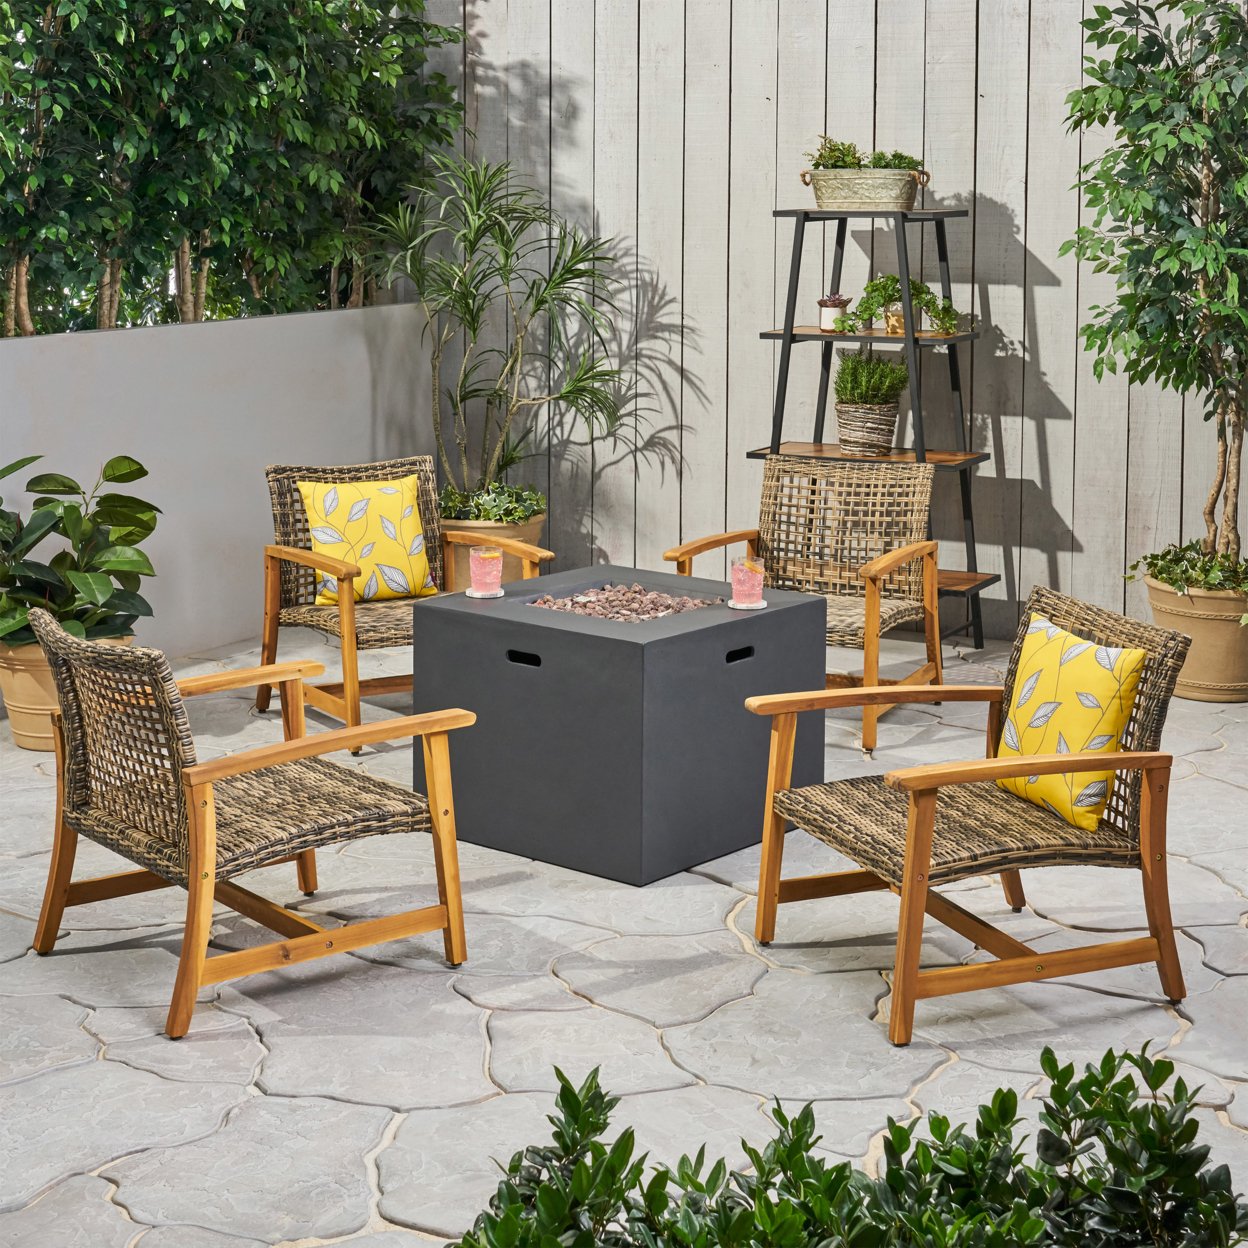 Carry Outdoor 5 Piece Wood And Wicker Club Chairs And Fire Pit Set - Mixed Mocha, Natural Finish, Dark Gray